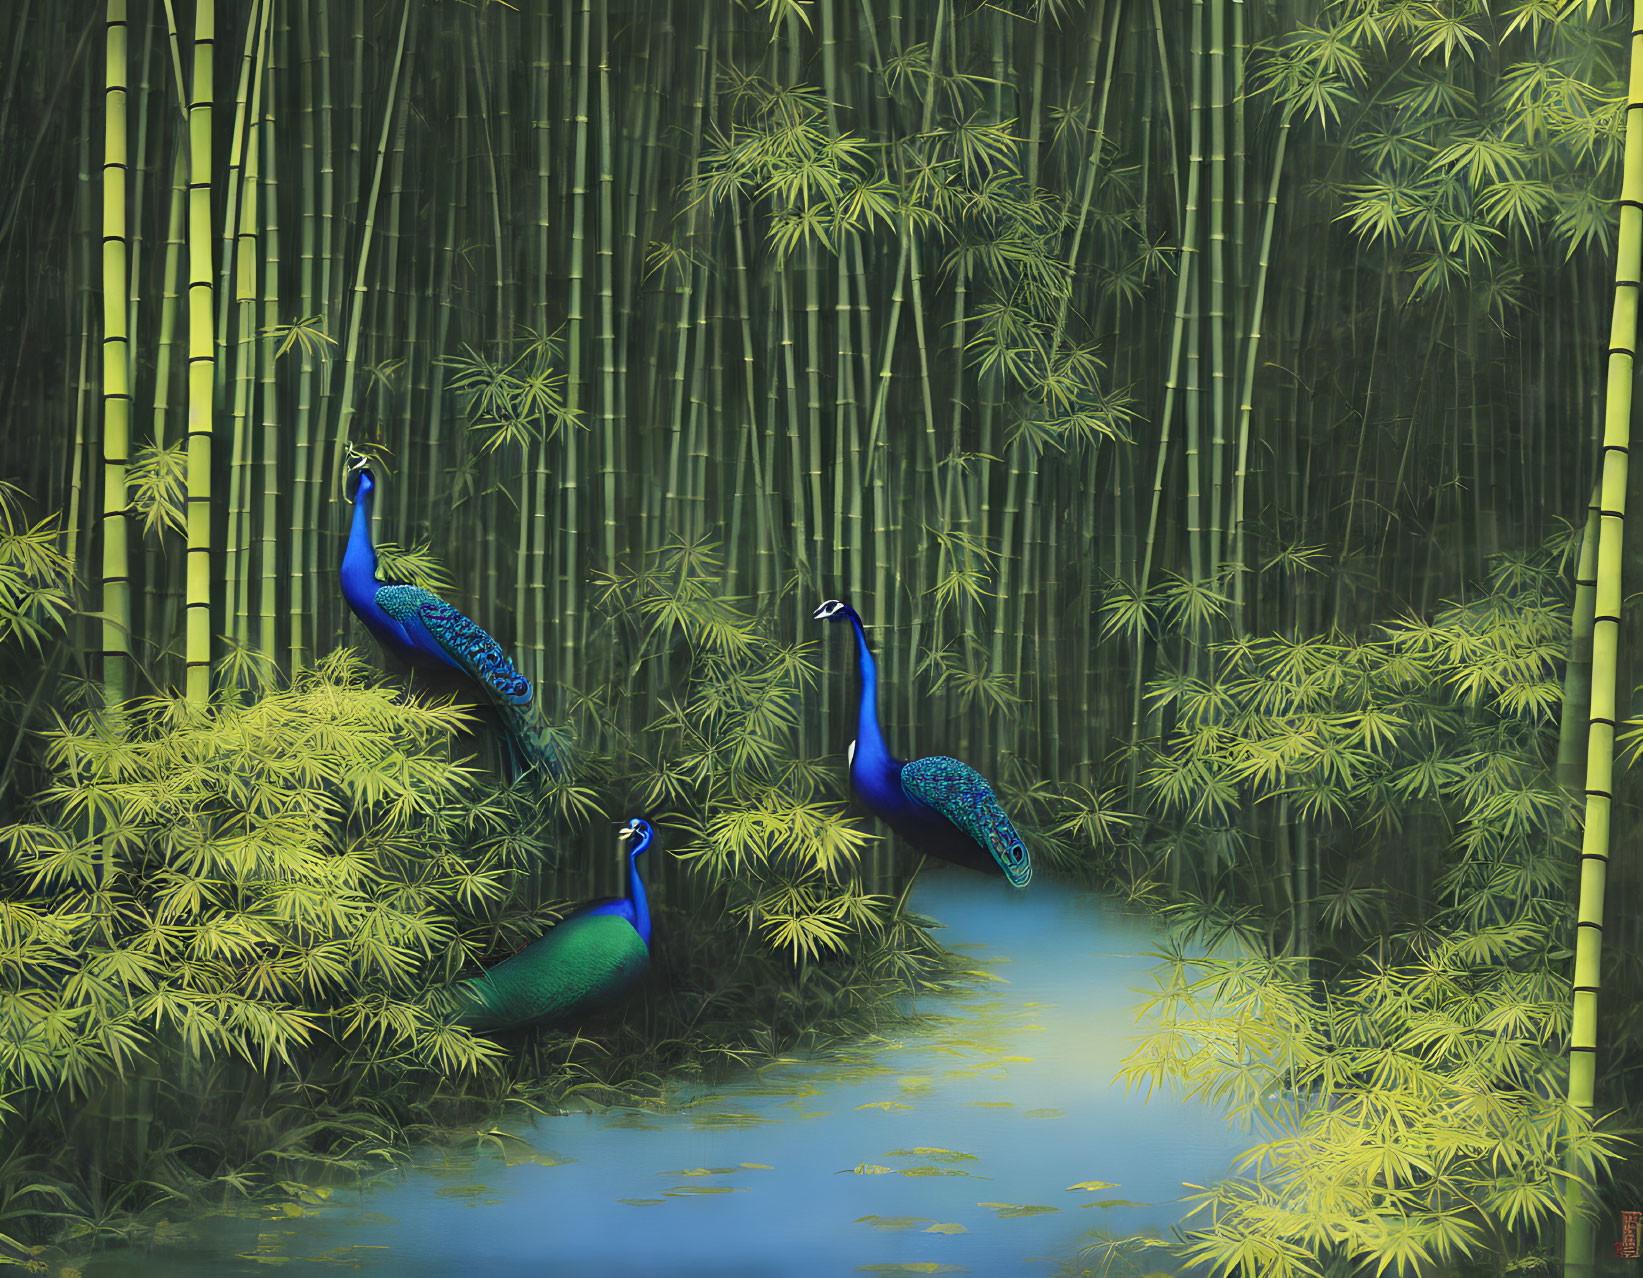 Peacock in a bamboo forest 